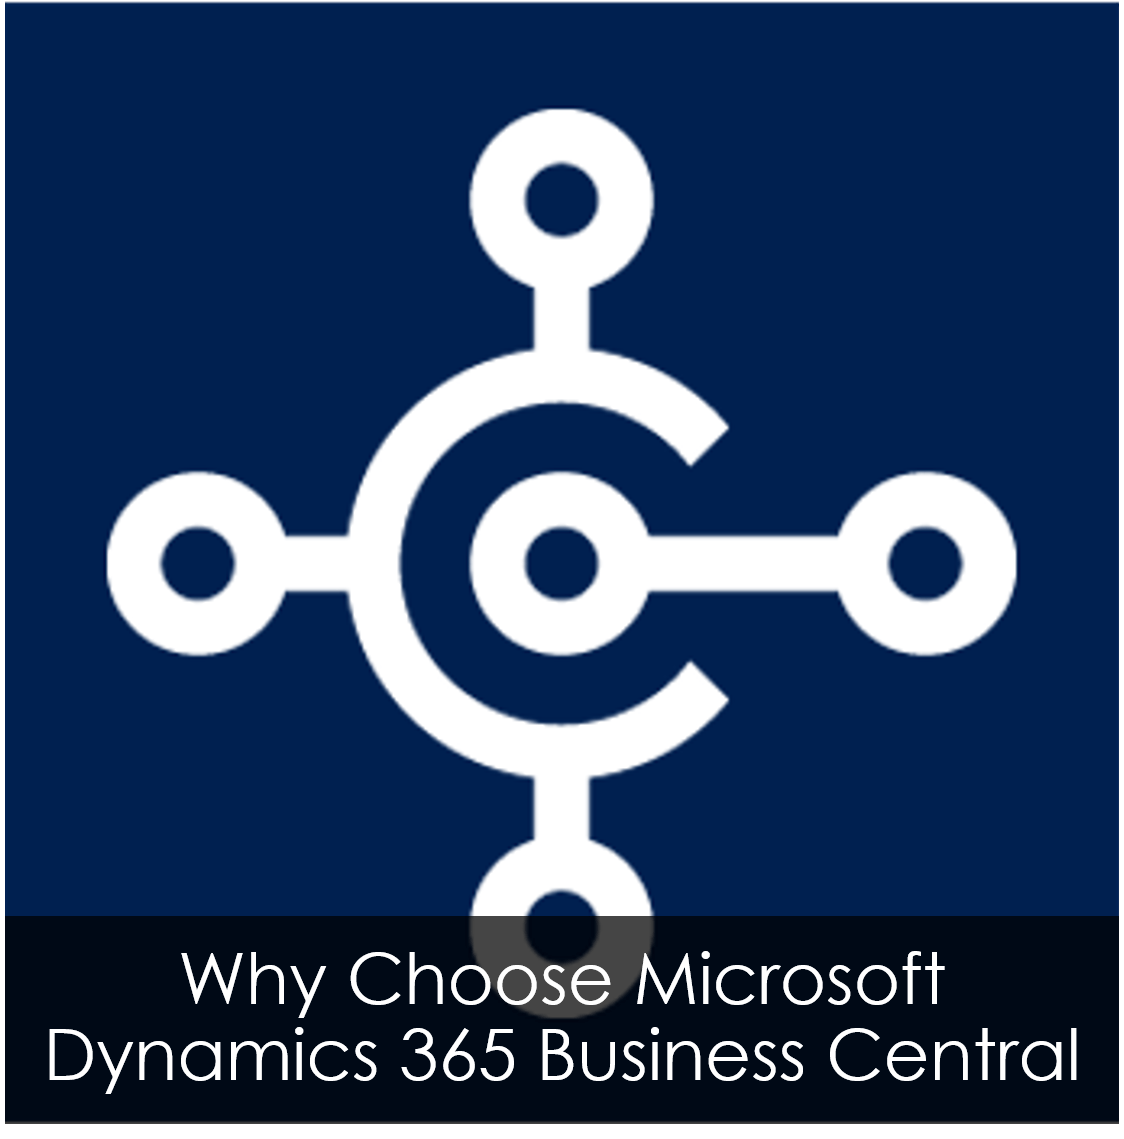 Microsoft Business Logo - Why Choose Microsoft Dynamics 365 Business Central? | ArcherPoint, Inc.